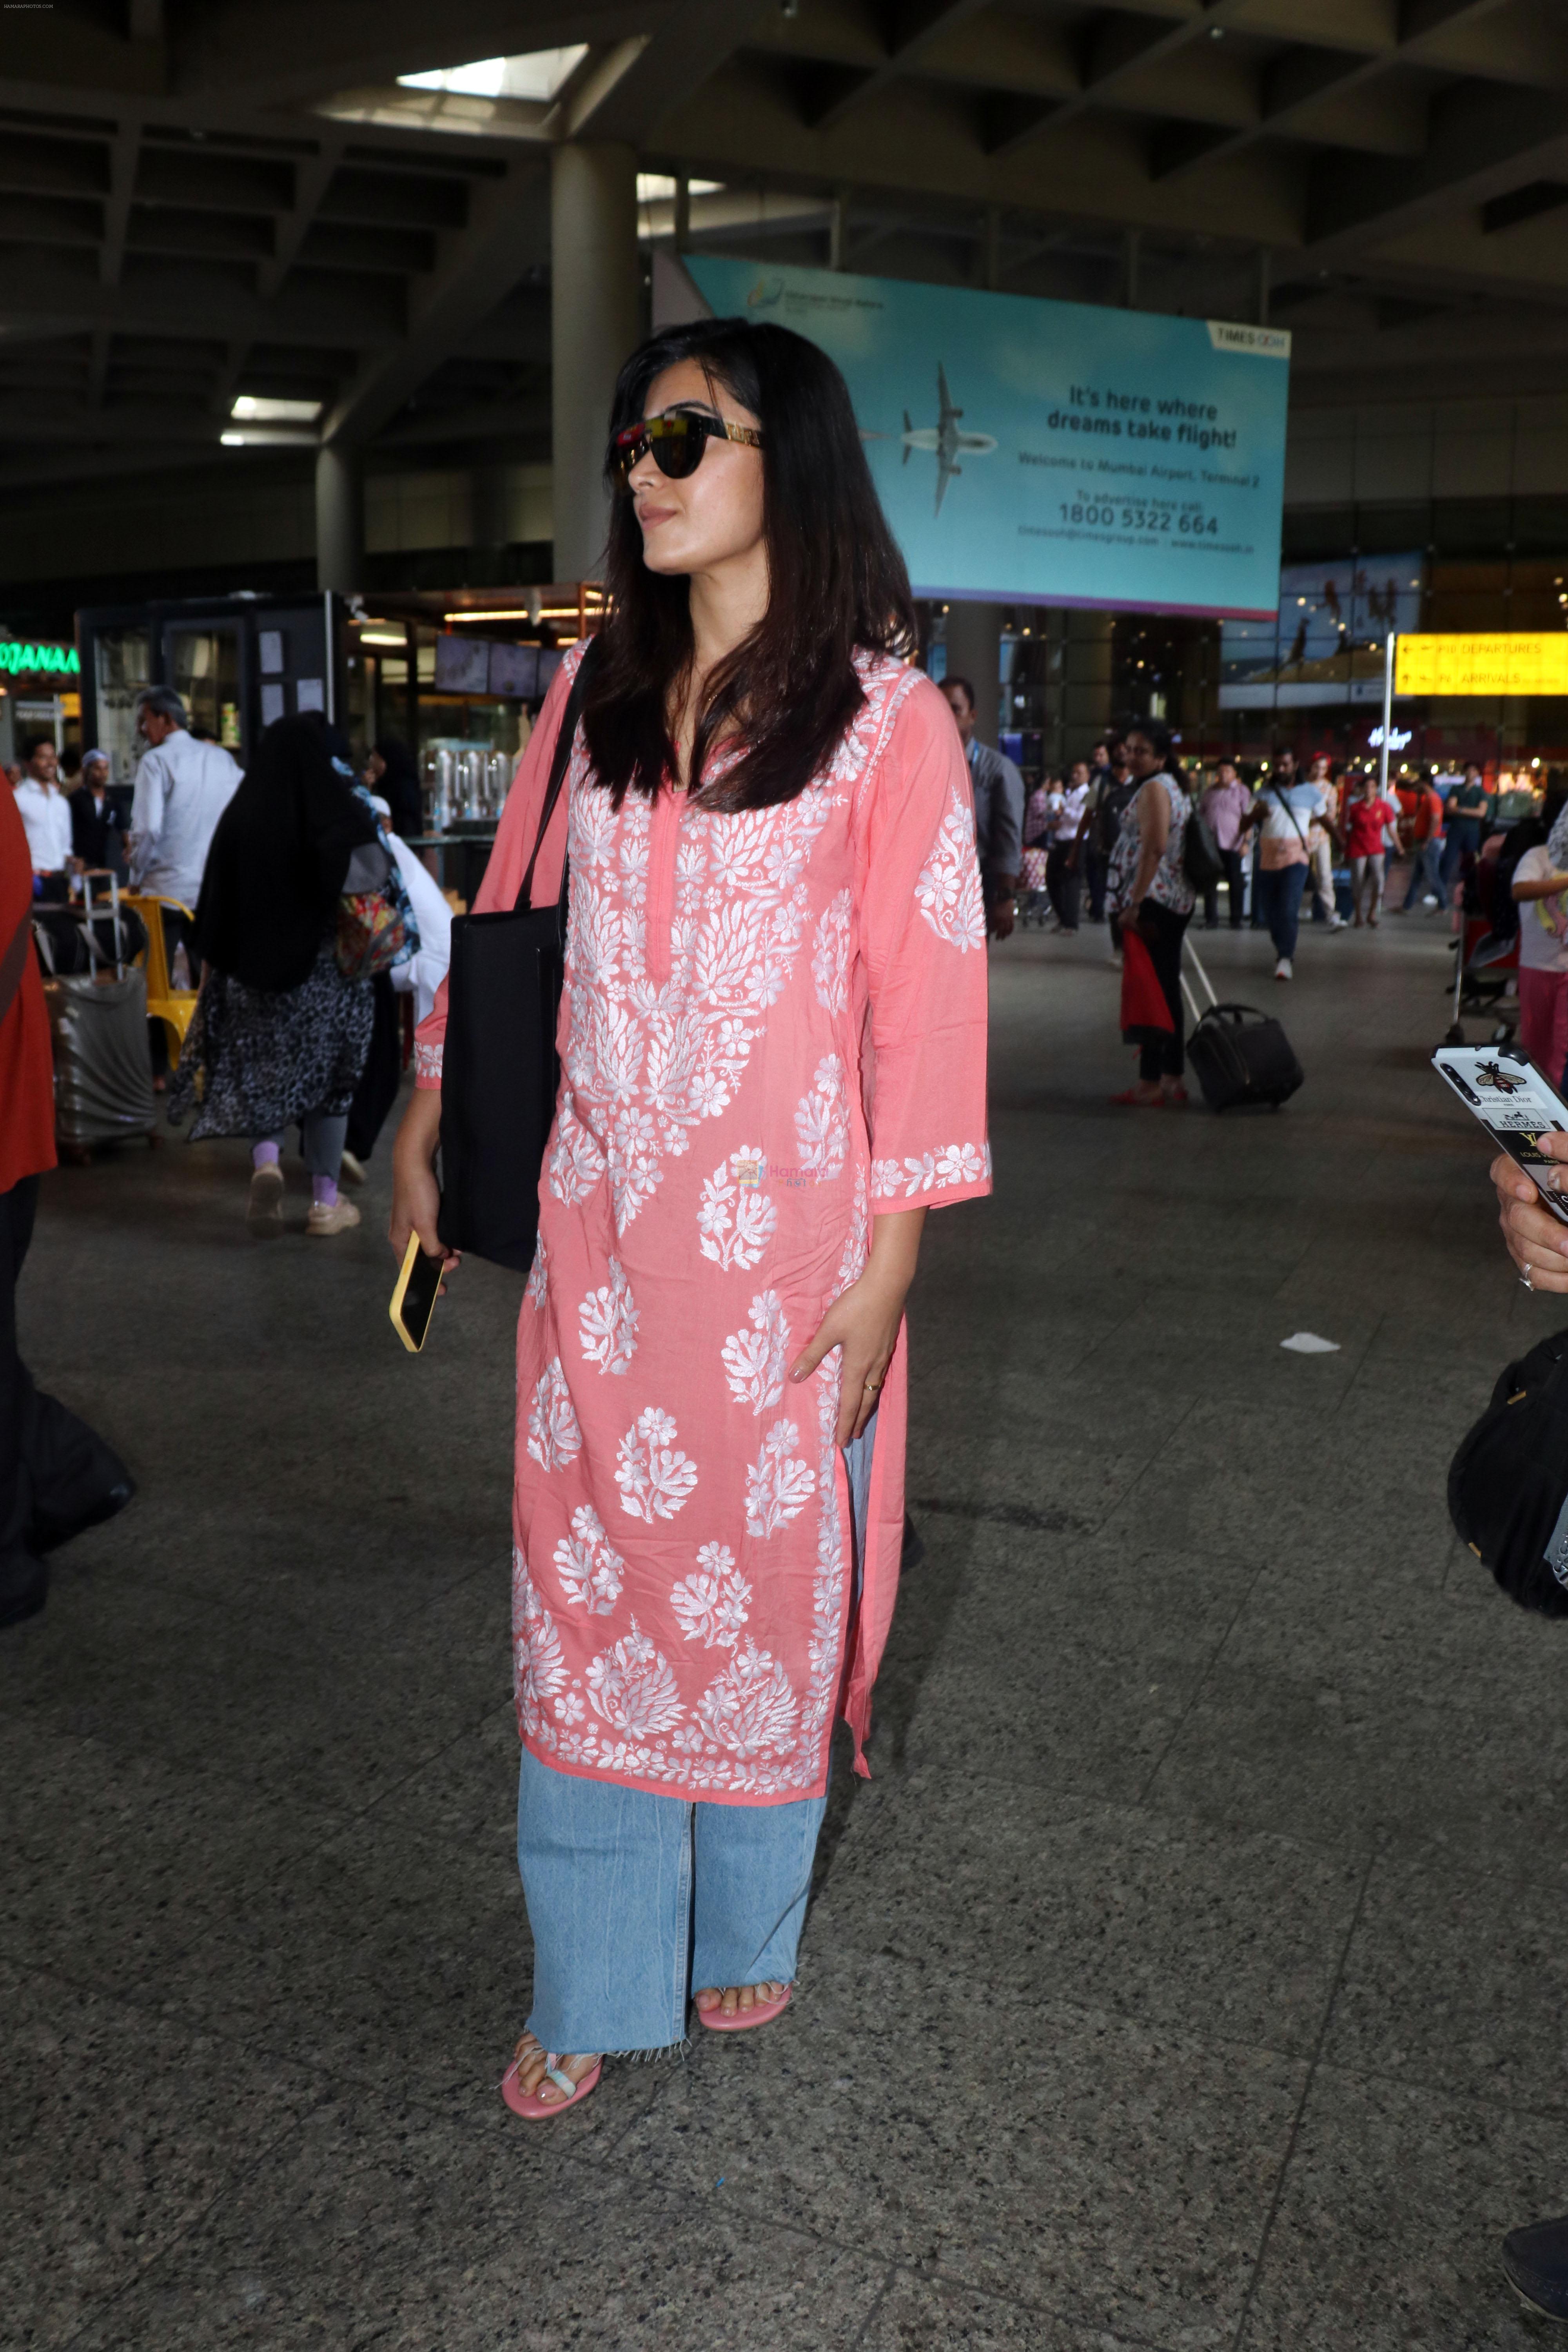 Rashmika Mandanna seen in a pink top and shredded jeans at the airport on 23 Jun 2023